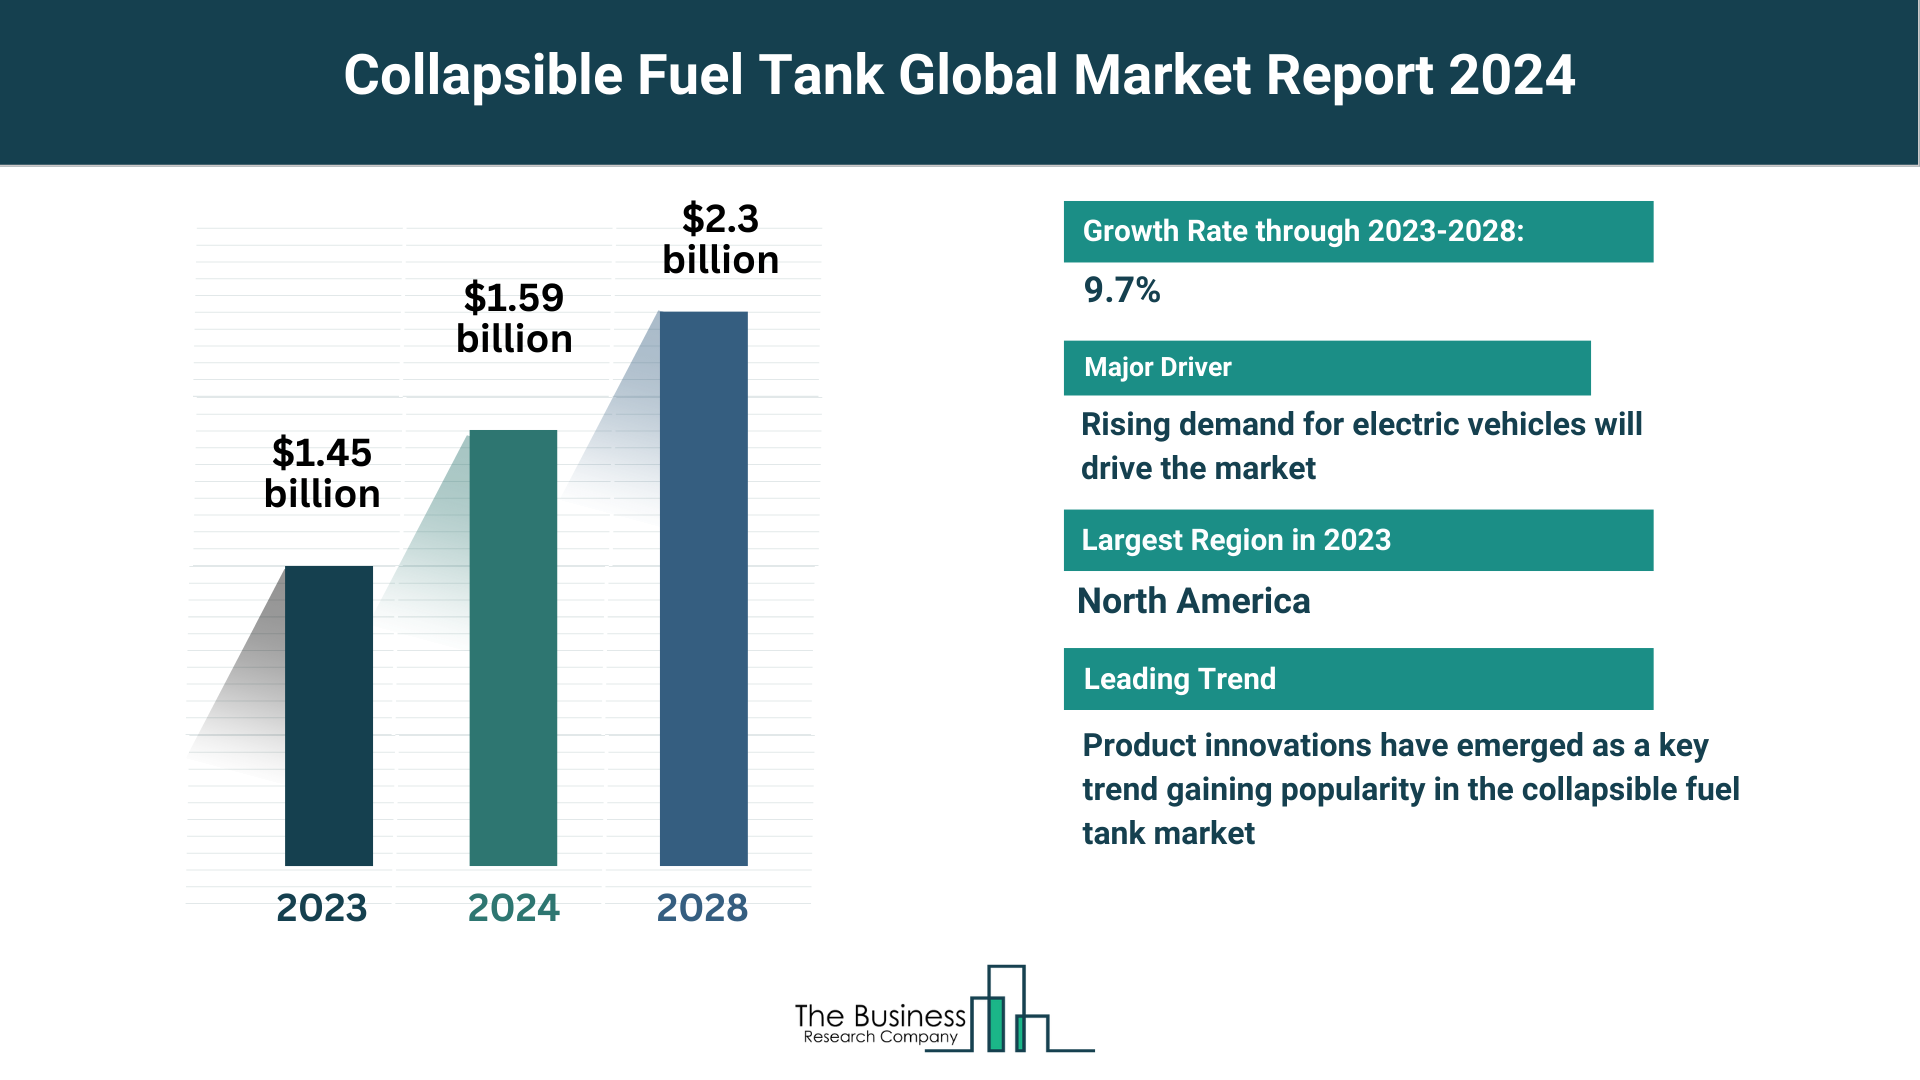 Global Collapsible Fuel Tank Market Analysis: Size, Drivers, Trends, Opportunities And Strategies